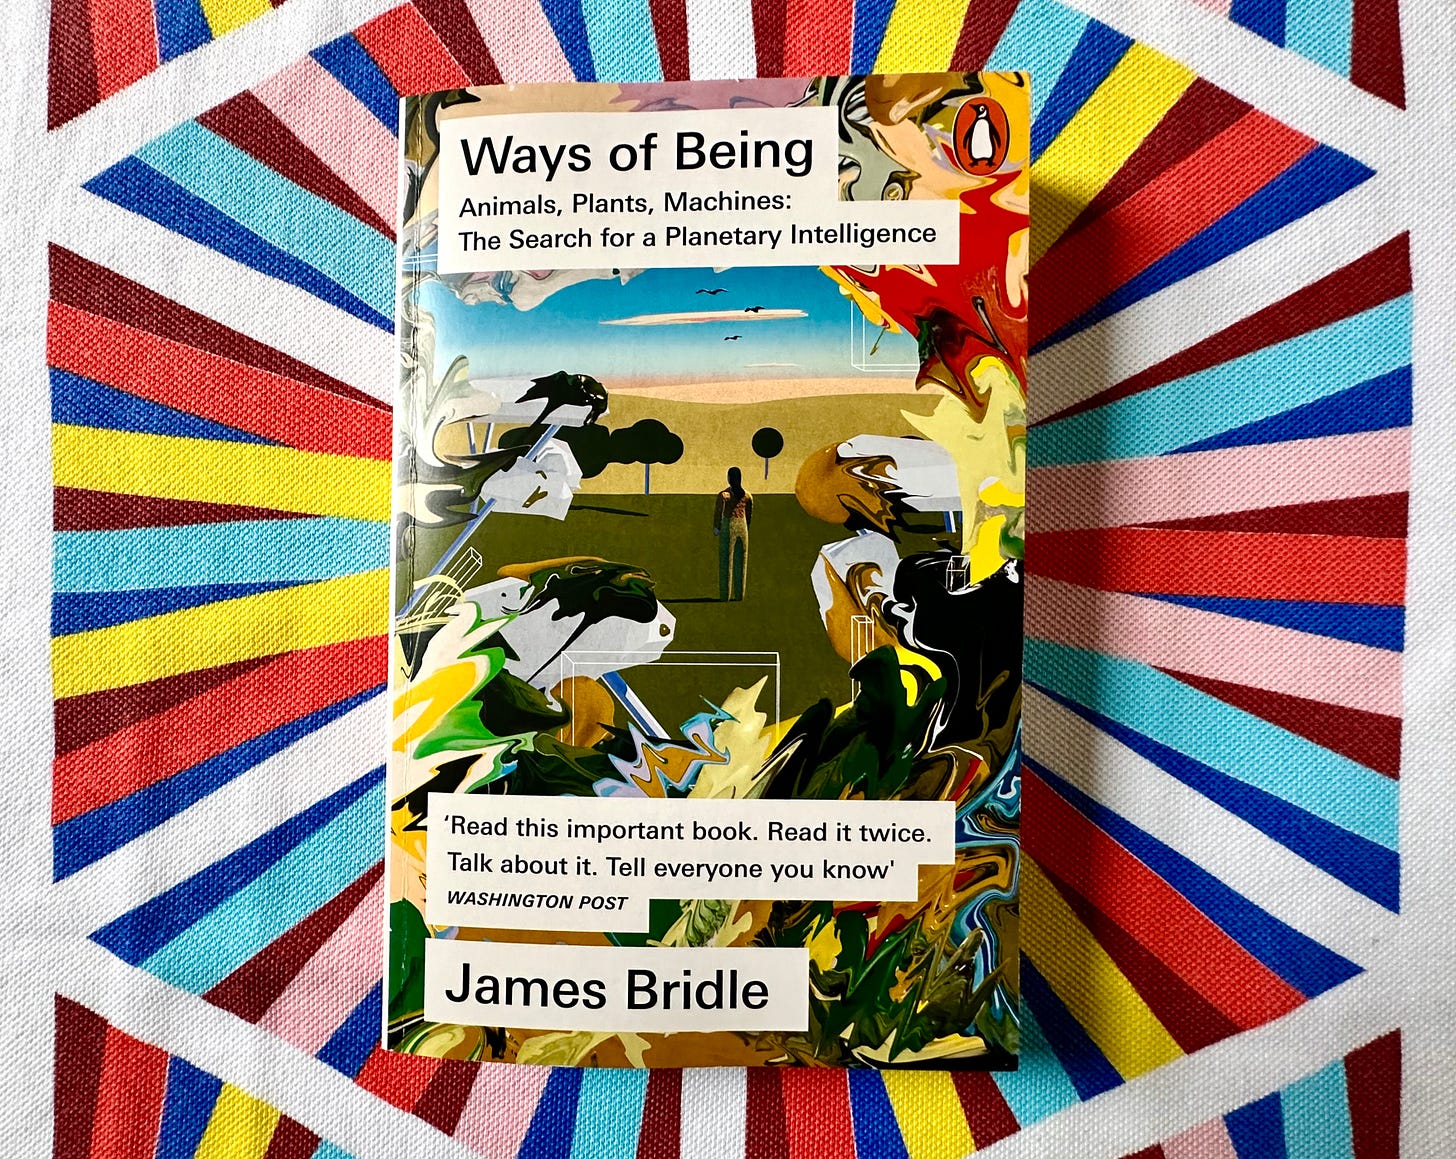 Picture of a book titled "Ways of Being", by James Bridle, on a multi-coloured striped cloth with white background. The book’s cover illustration is an abstract landscape based on an original design by Pablo Delcan. White text is overlaid stating “First #5: Ways of Being: Animal, plant, and machine intelligence. Available April 1st, 2024 at UXMICHAELCO.SUBSTACK.COM”.